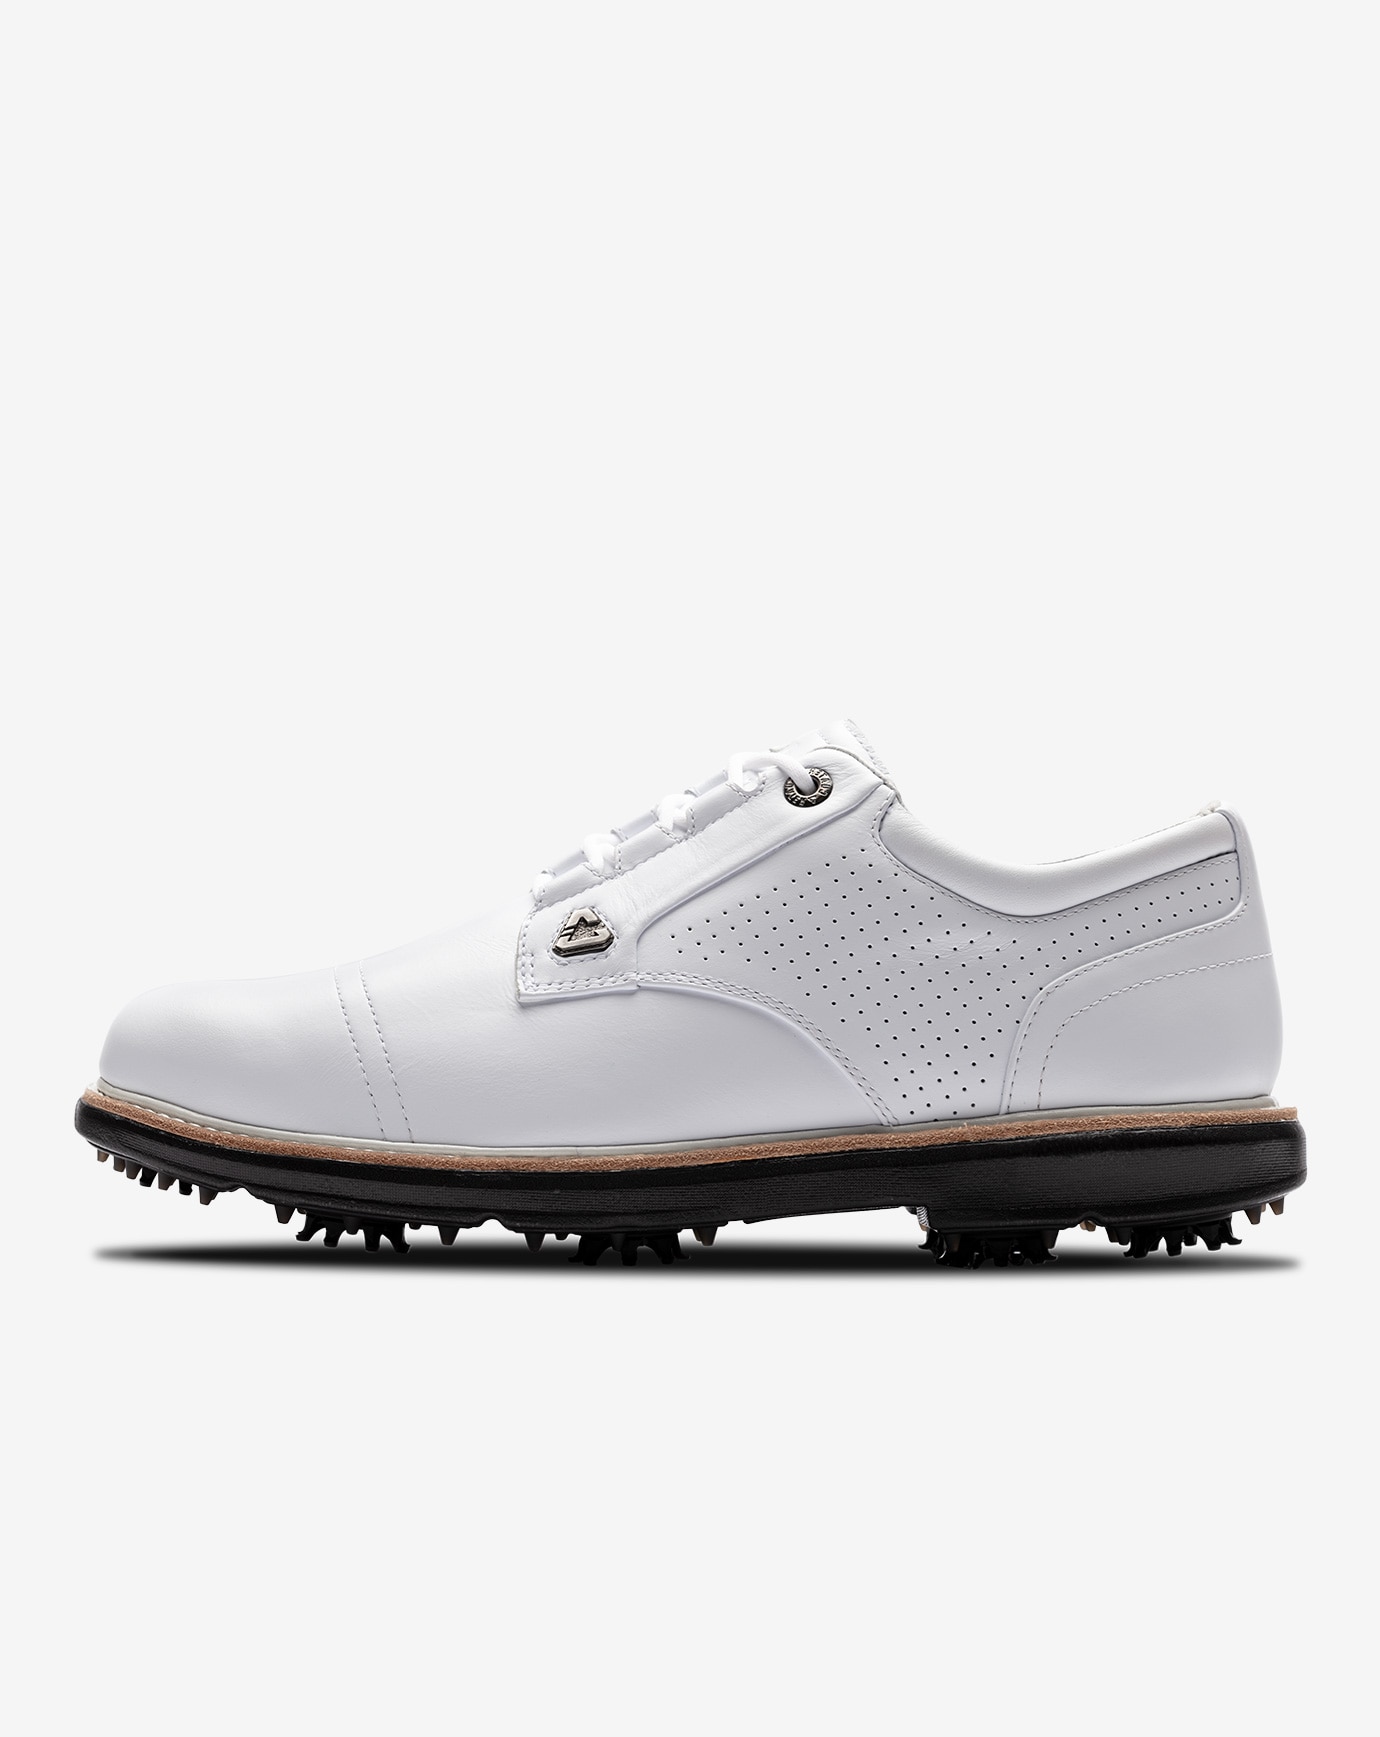 THE LEGEND SPIKED GOLF SHOE Image Thumbnail 1